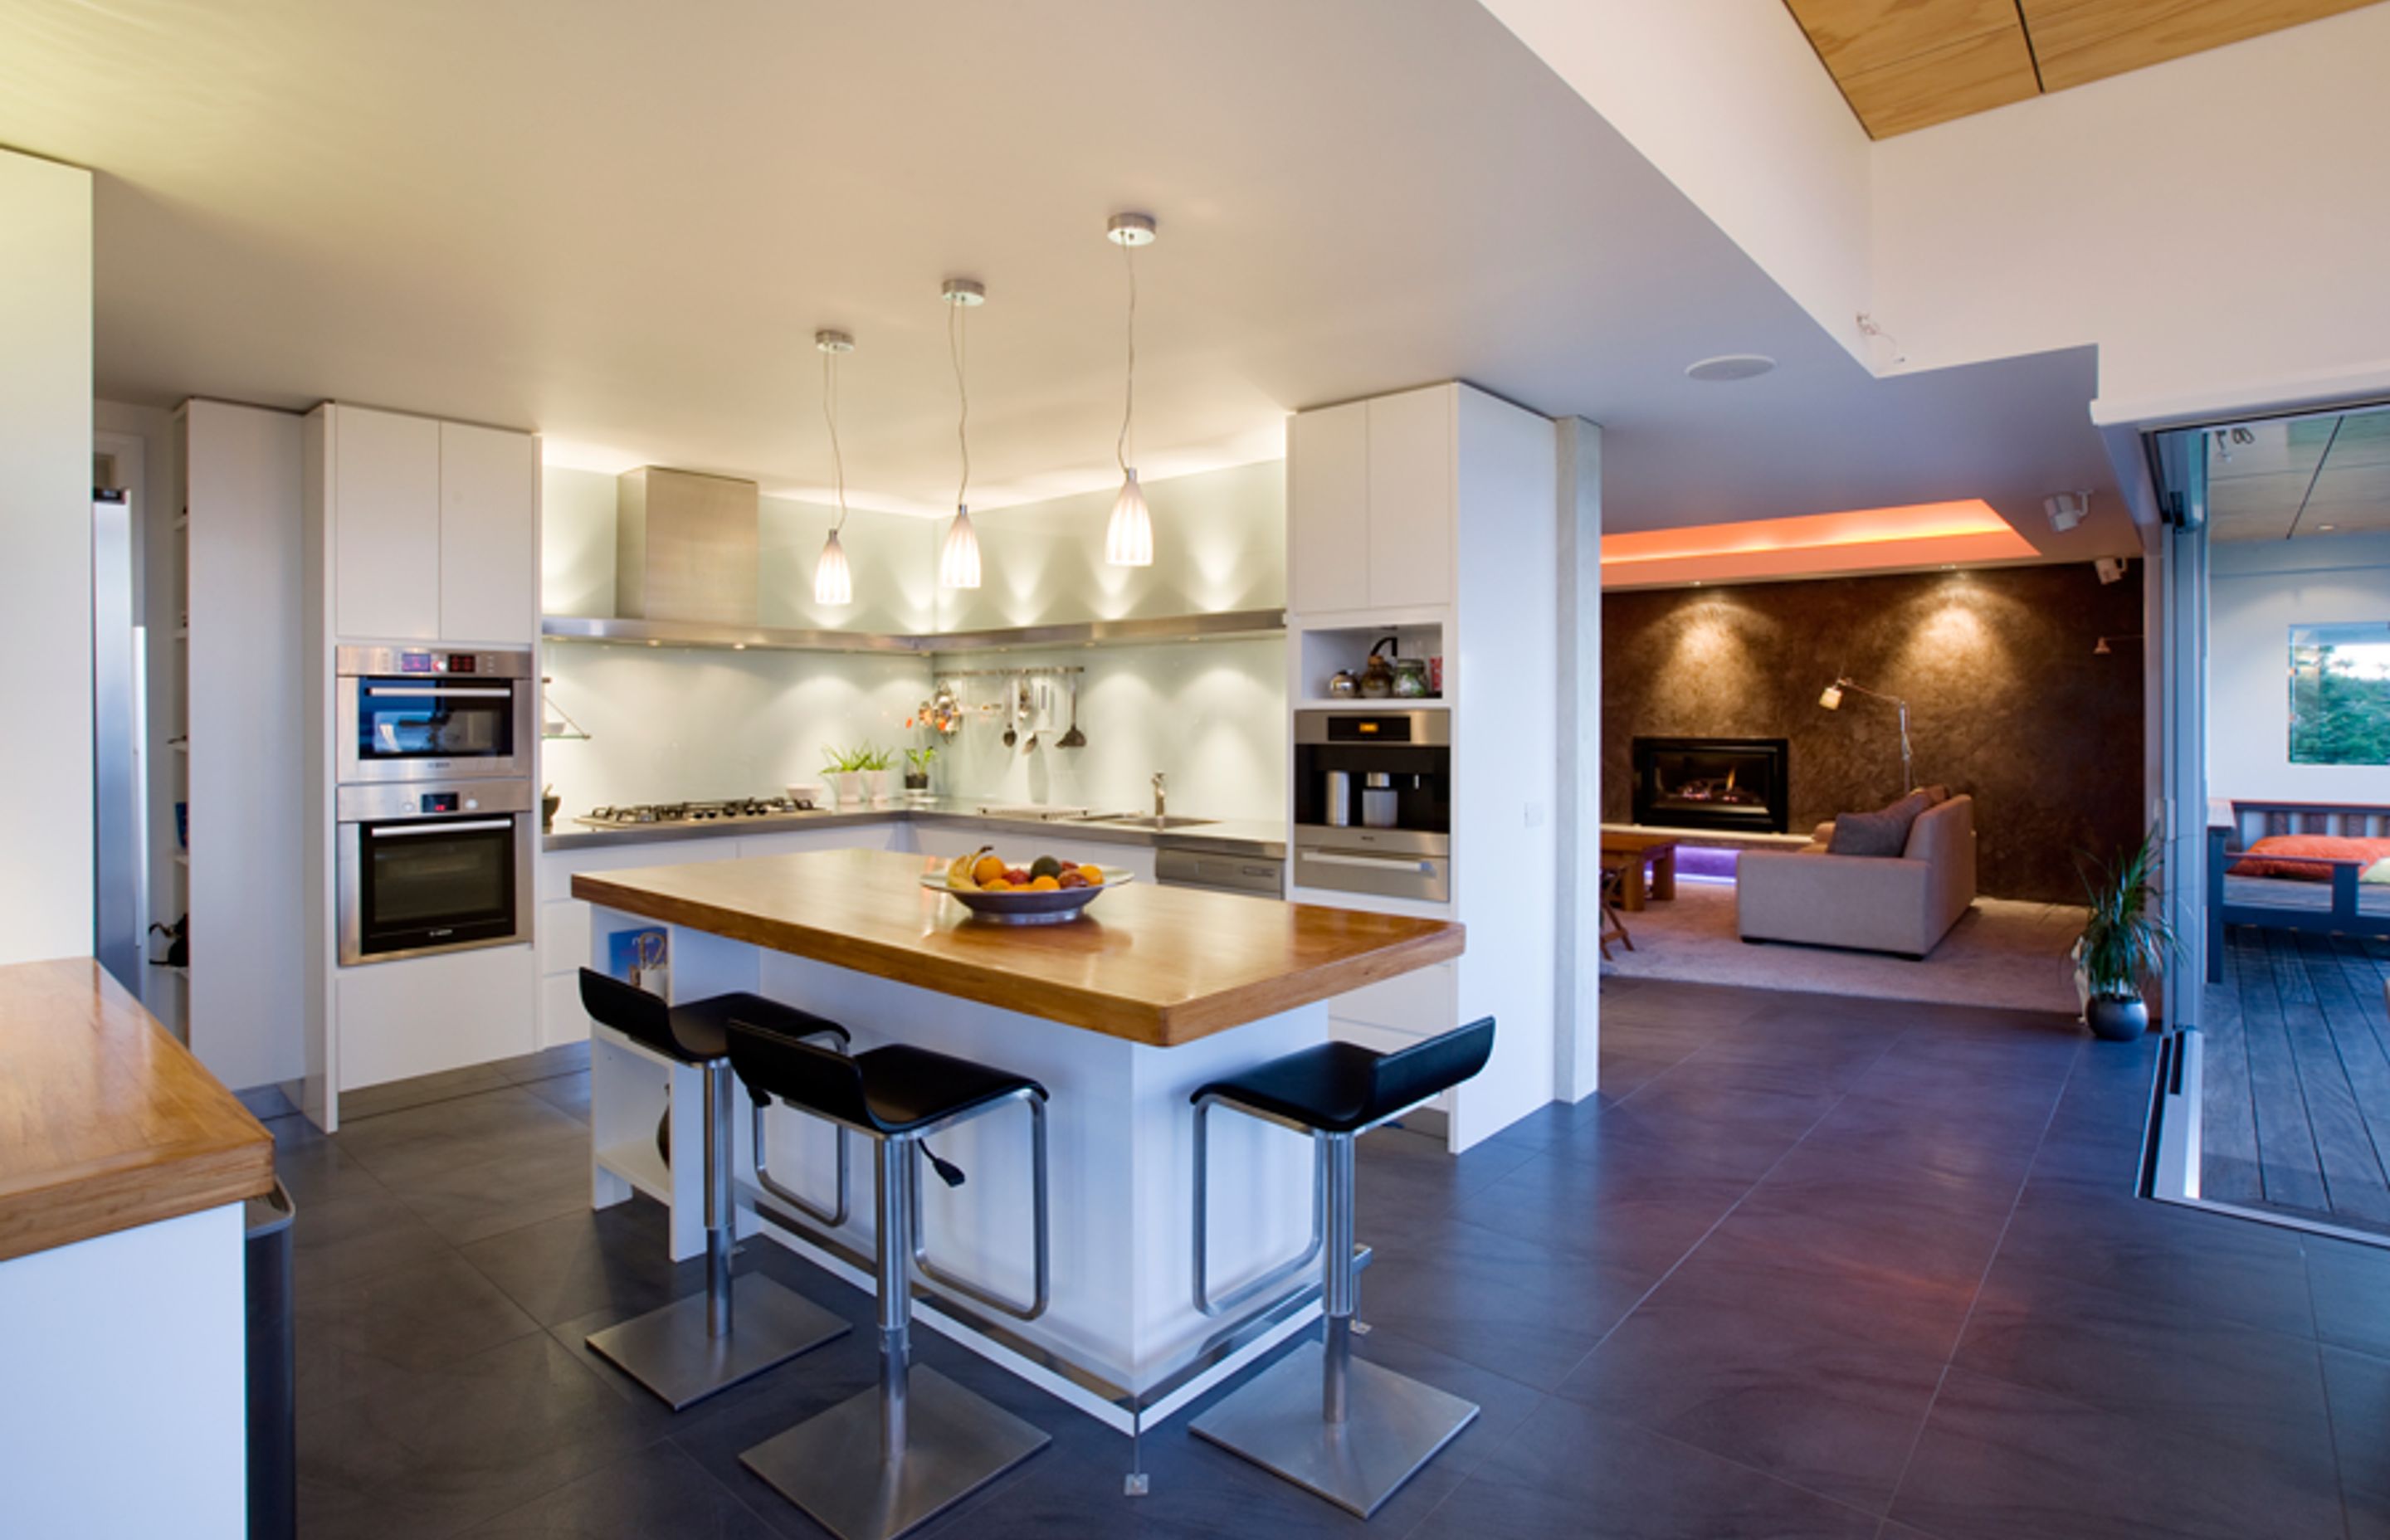 Functional and stunning kitchen and entertainment space indoor and outdoor. 